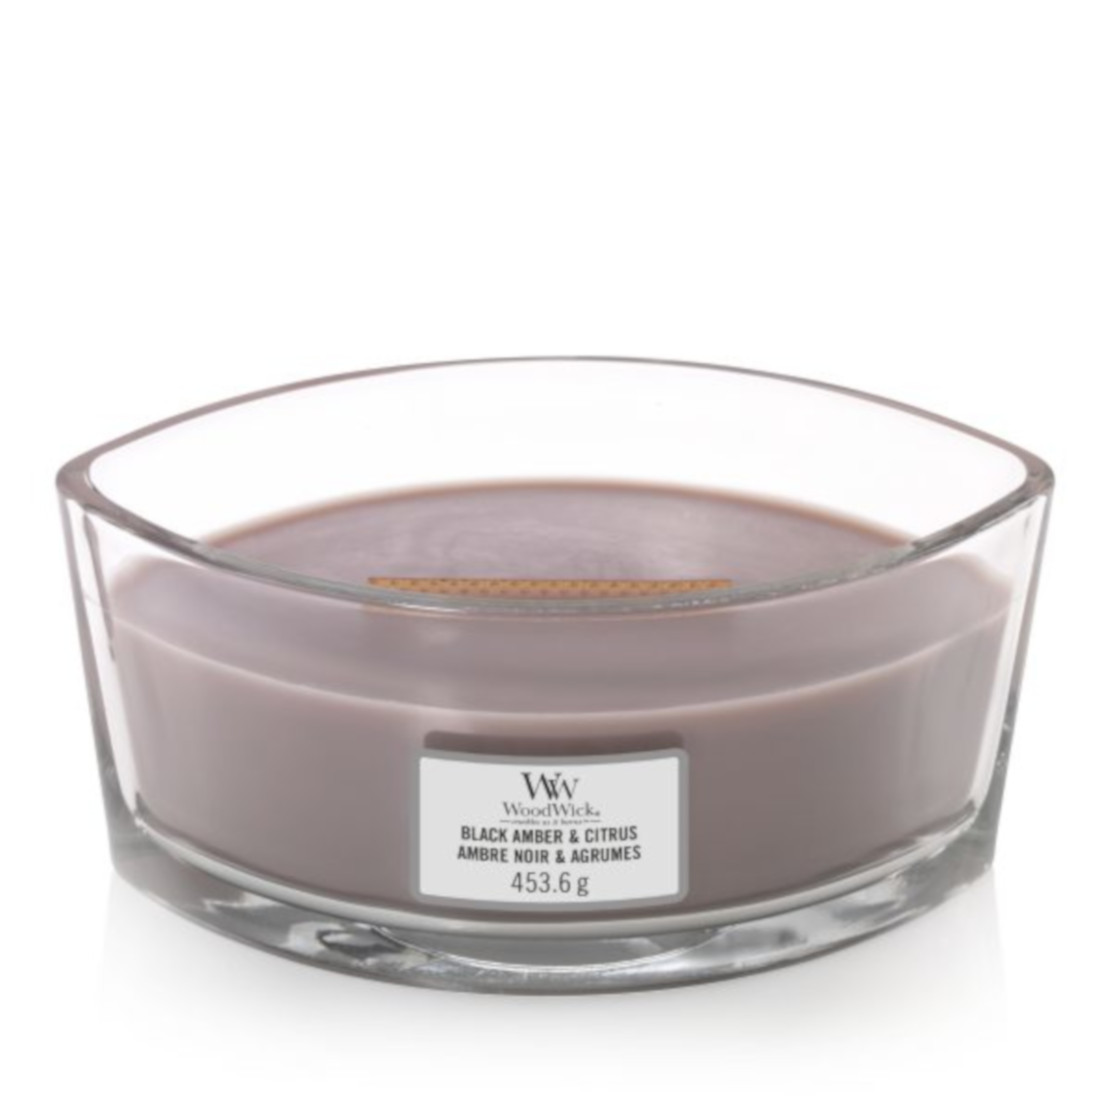 Woodwick Black Amber and Citrus Hearthwick Candle